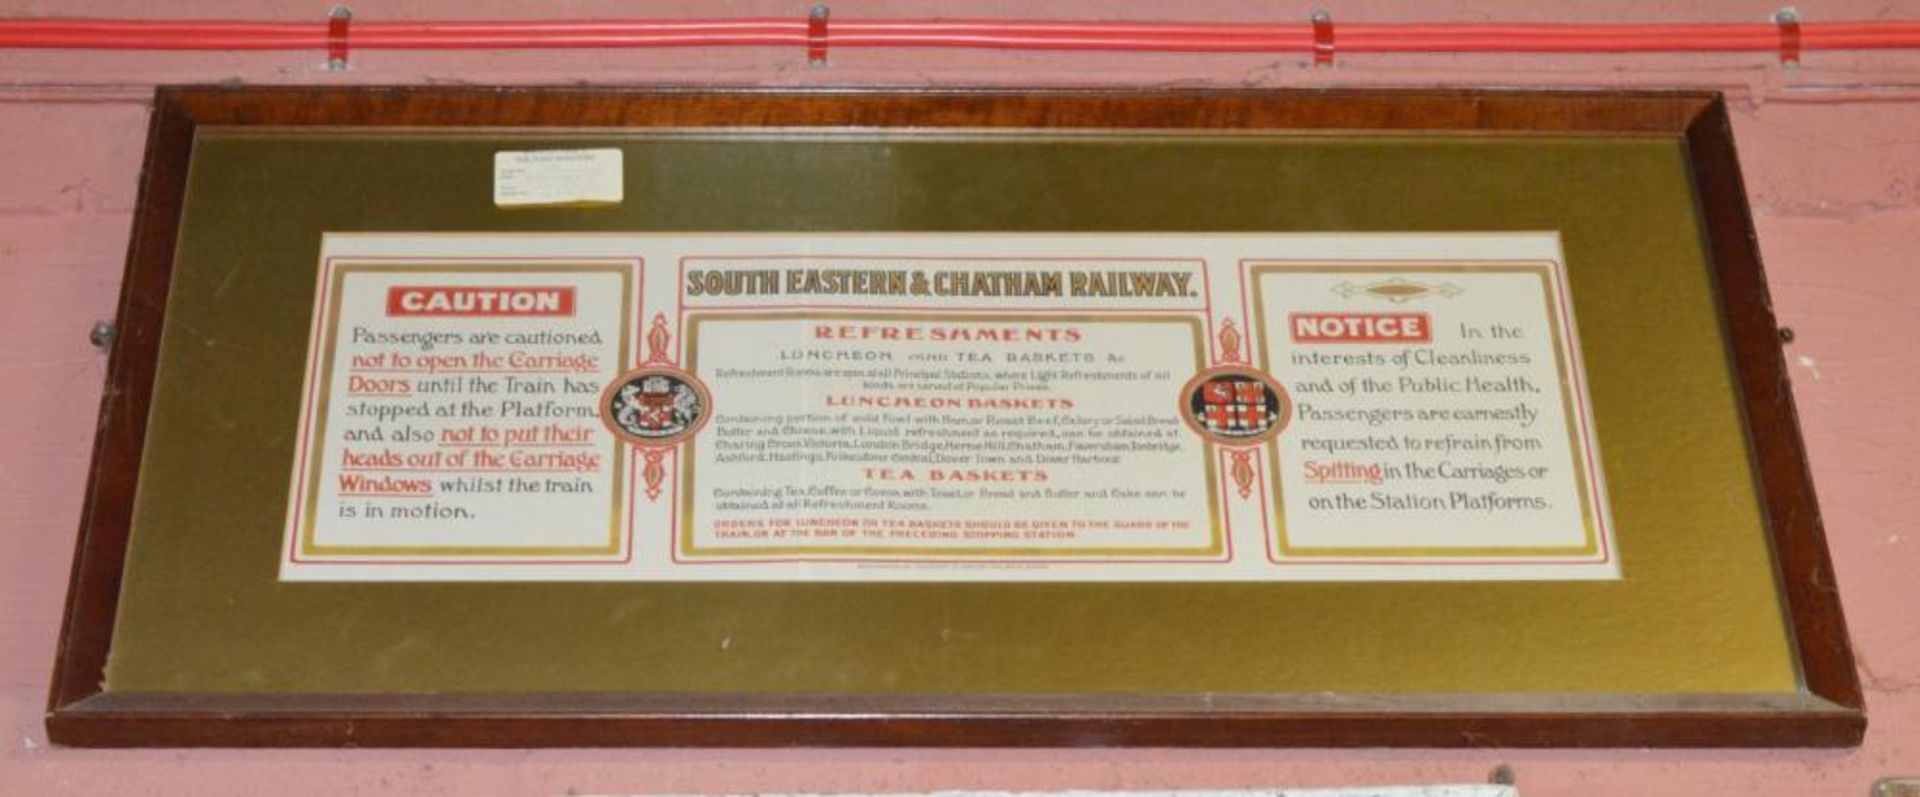 1 x South Eastern & Chatham Railway Passenger Food Menu - Reproduced By Courtesy of British Railways - Image 2 of 3